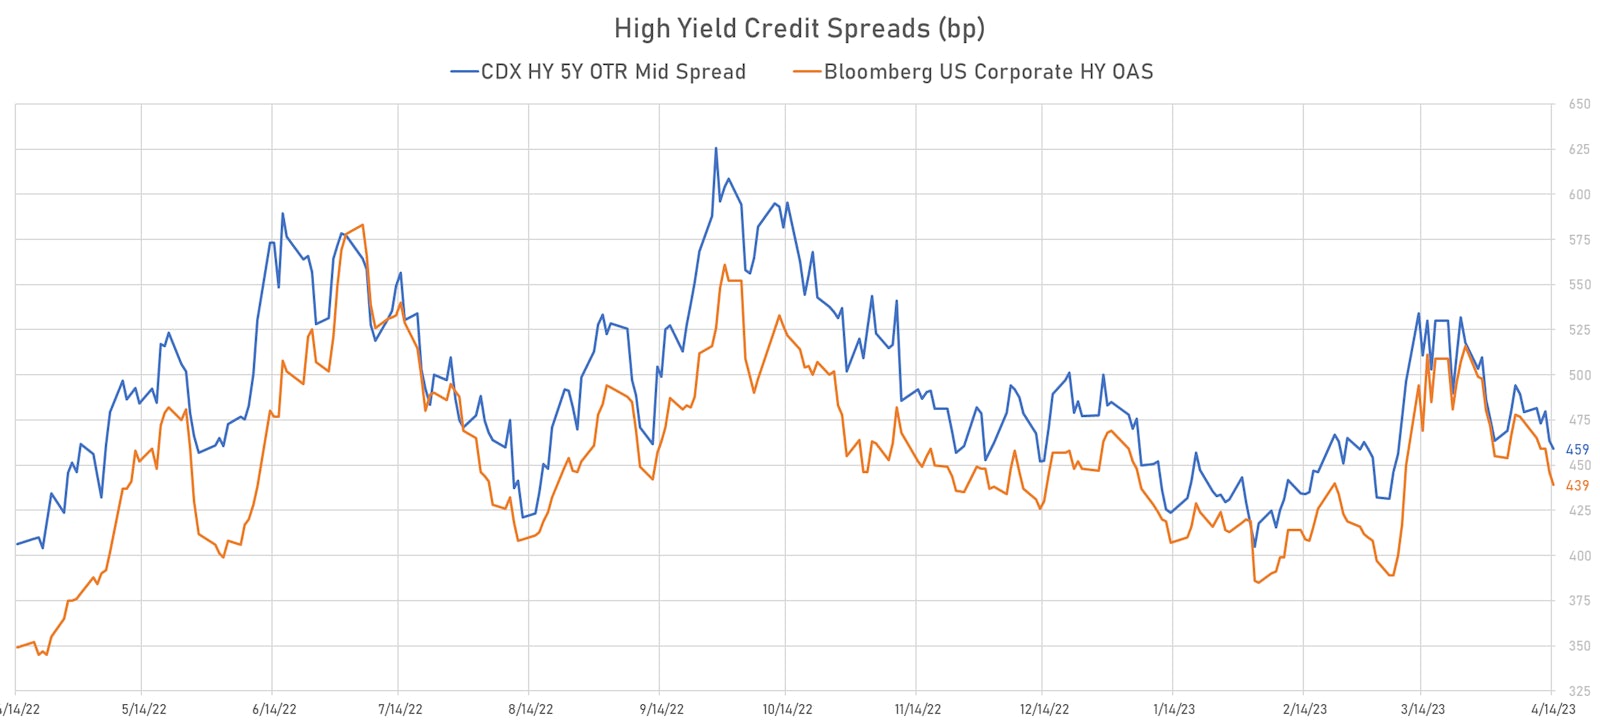 US High Yield Cash & Synthetic Credit Spreads | Sources: phipost.com, Refinitiv & FactSet data